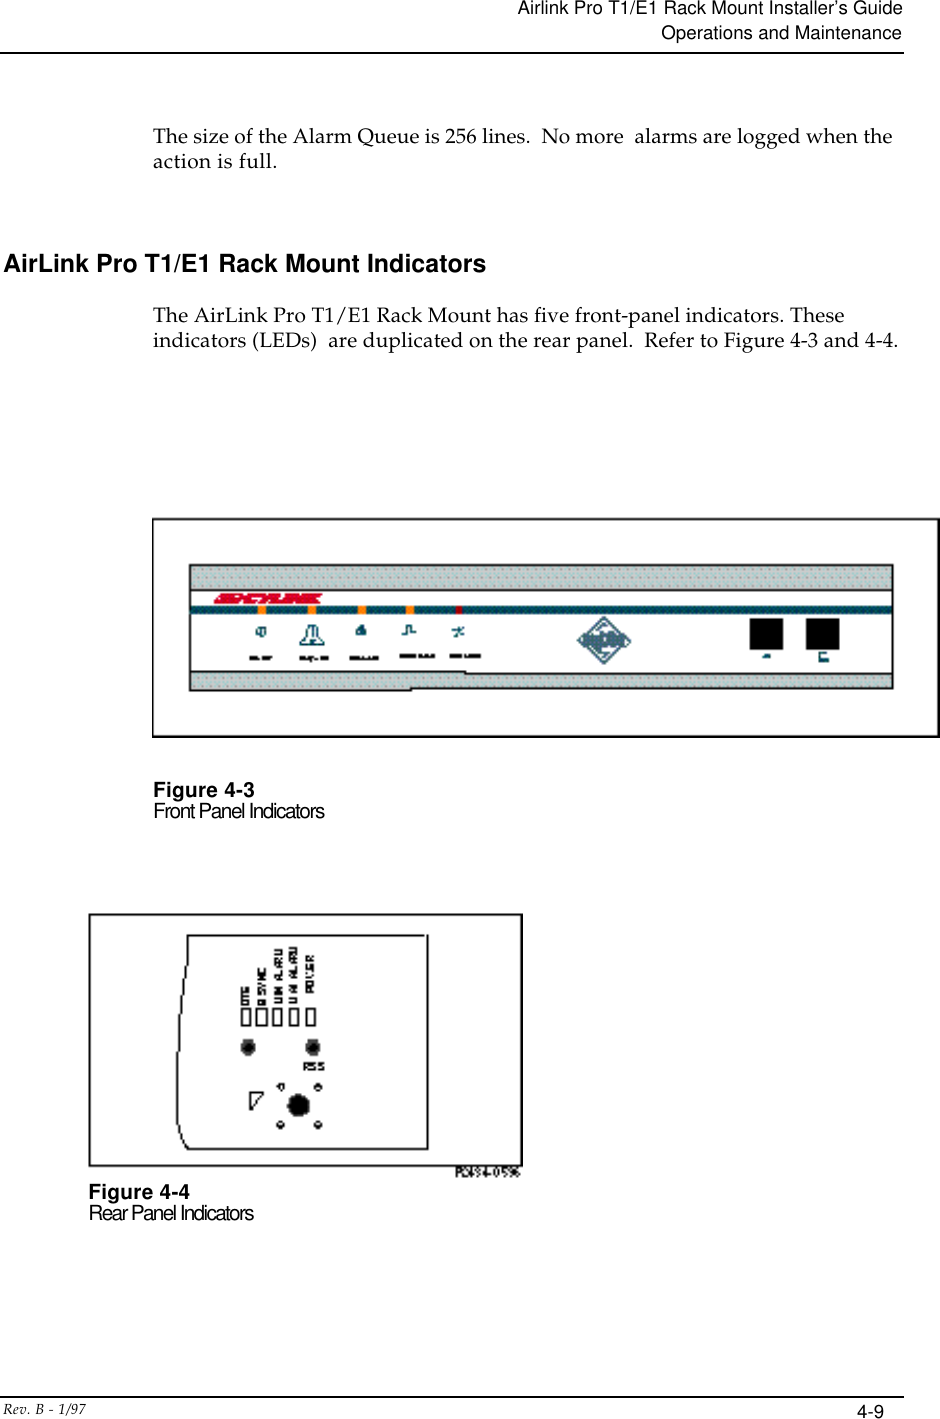 Airlink Pro T1/E1 Rack Mount Installer’s GuideOperations and MaintenanceRev. B - 1/97 4-9The size of the Alarm Queue is 256 lines.  No more  alarms are logged when theaction is full.AirLink Pro T1/E1 Rack Mount IndicatorsThe AirLink Pro T1/E1 Rack Mount has five front-panel indicators. Theseindicators (LEDs)  are duplicated on the rear panel.  Refer to Figure 4-3 and 4-4.Figure 4-3Front Panel IndicatorsFigure 4-4Rear Panel Indicators